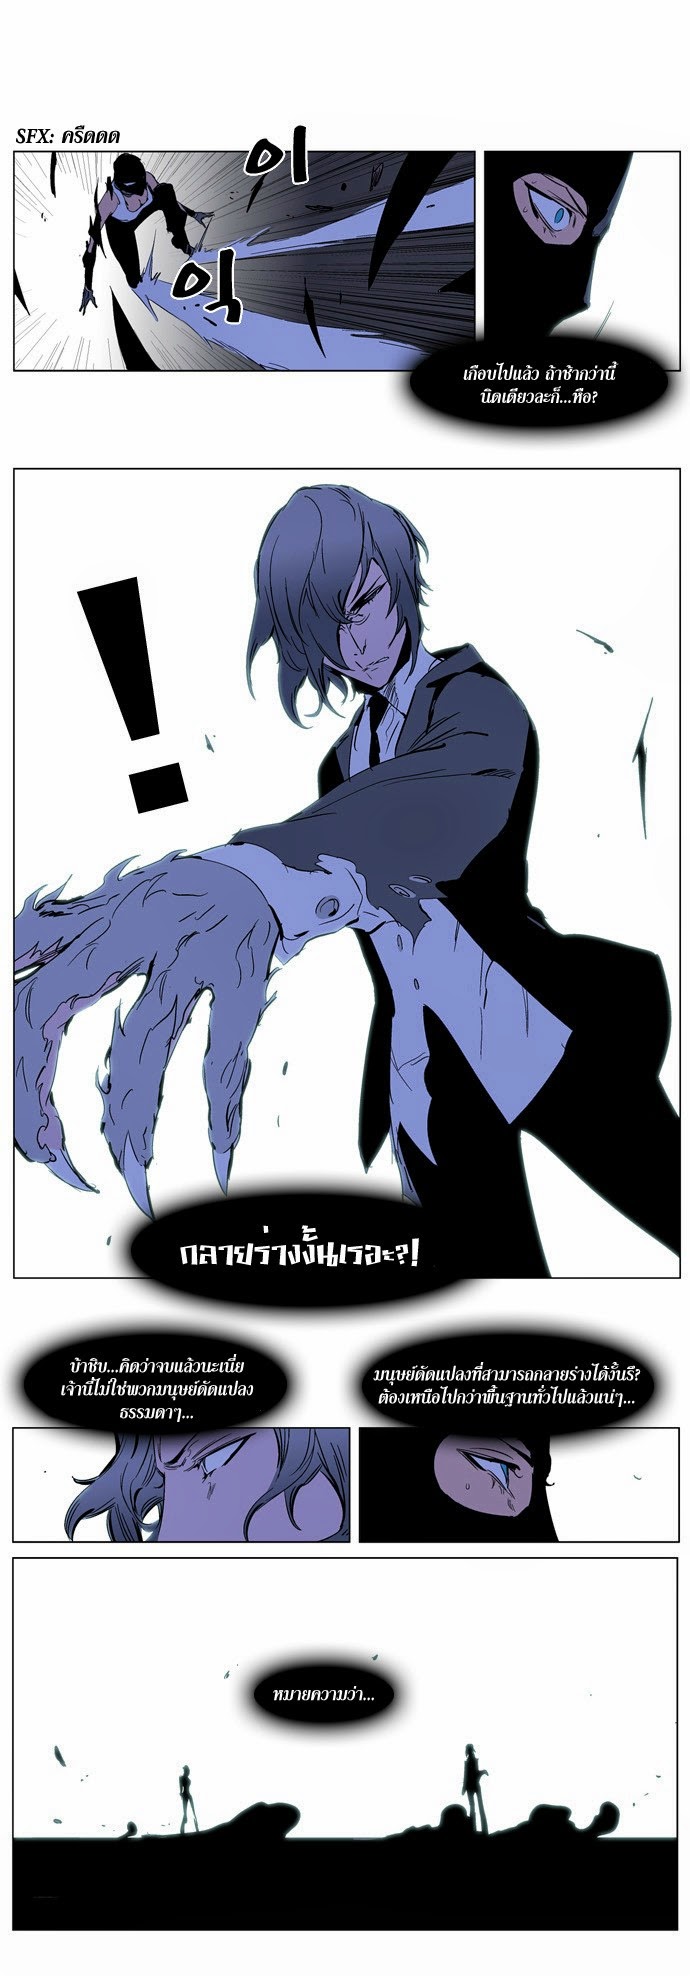 Noblesse 217 018